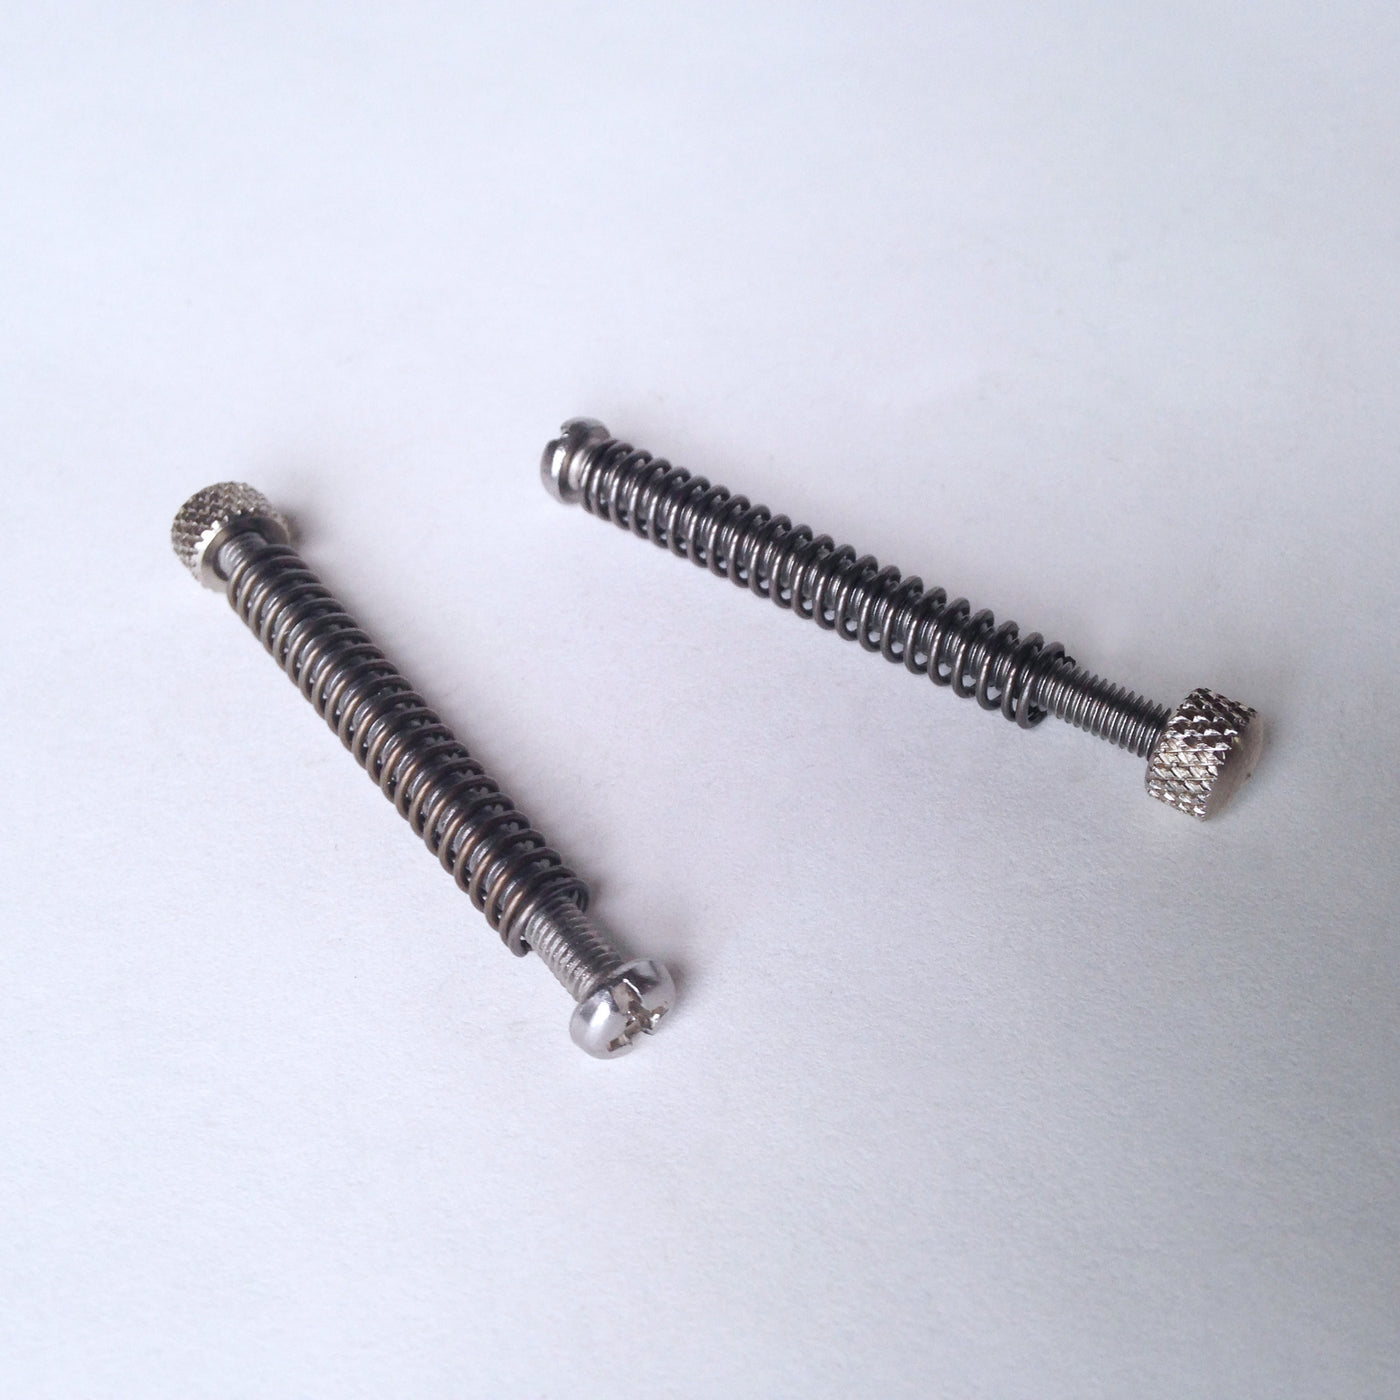 Dropout adjustment screws with springs and end-nuts